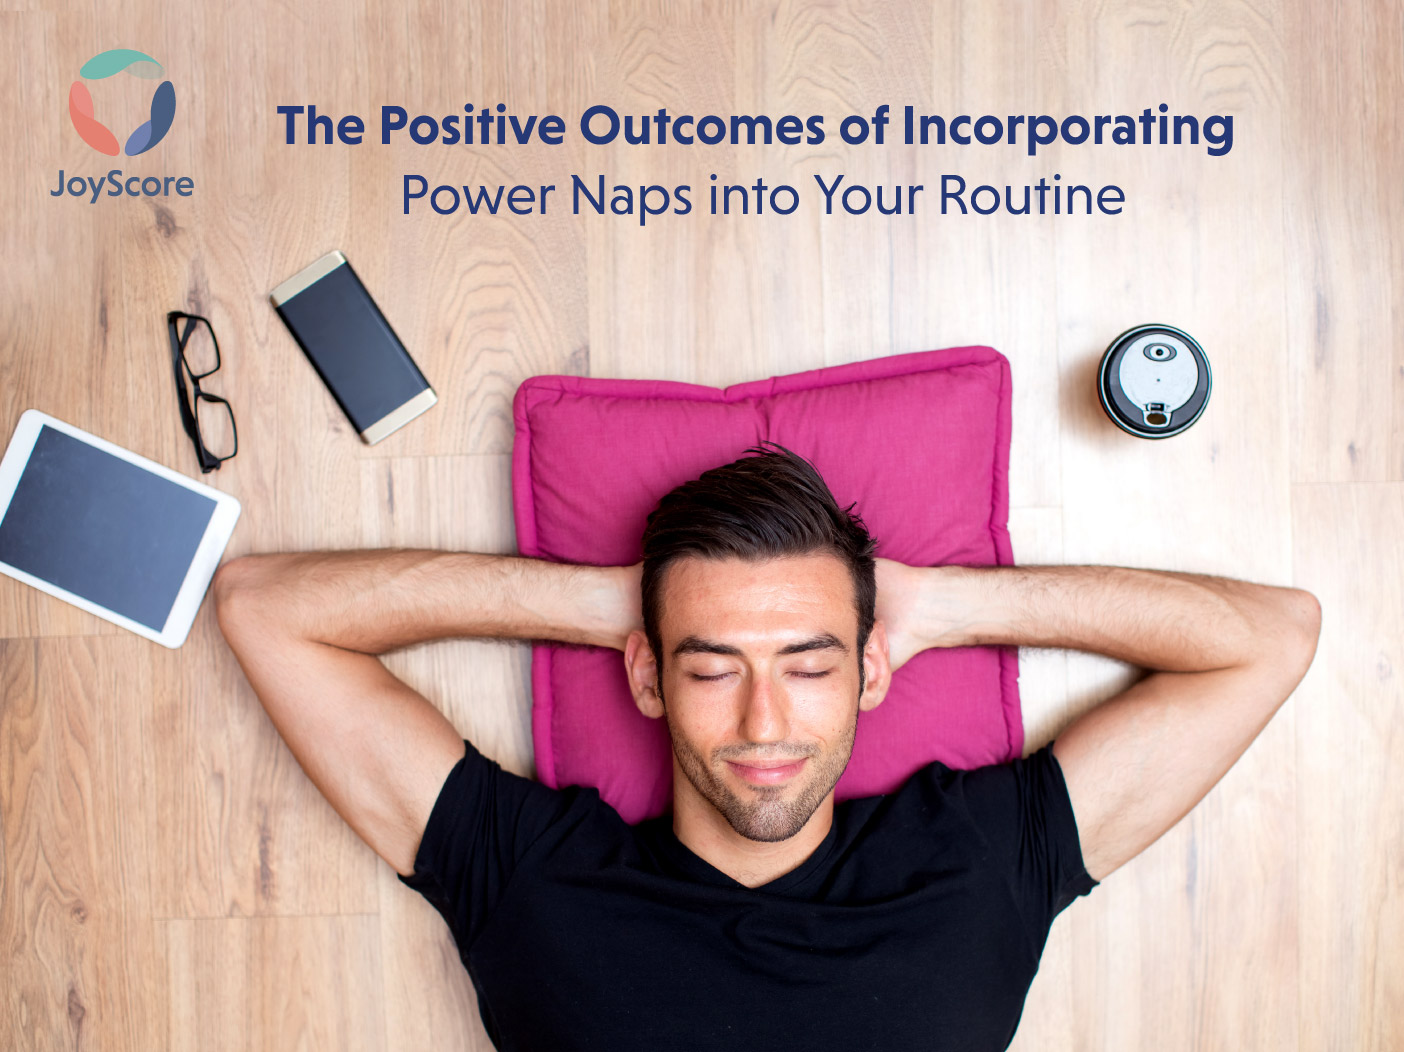 The Positive Outcomes of Incorporating Power Naps into Your Routine